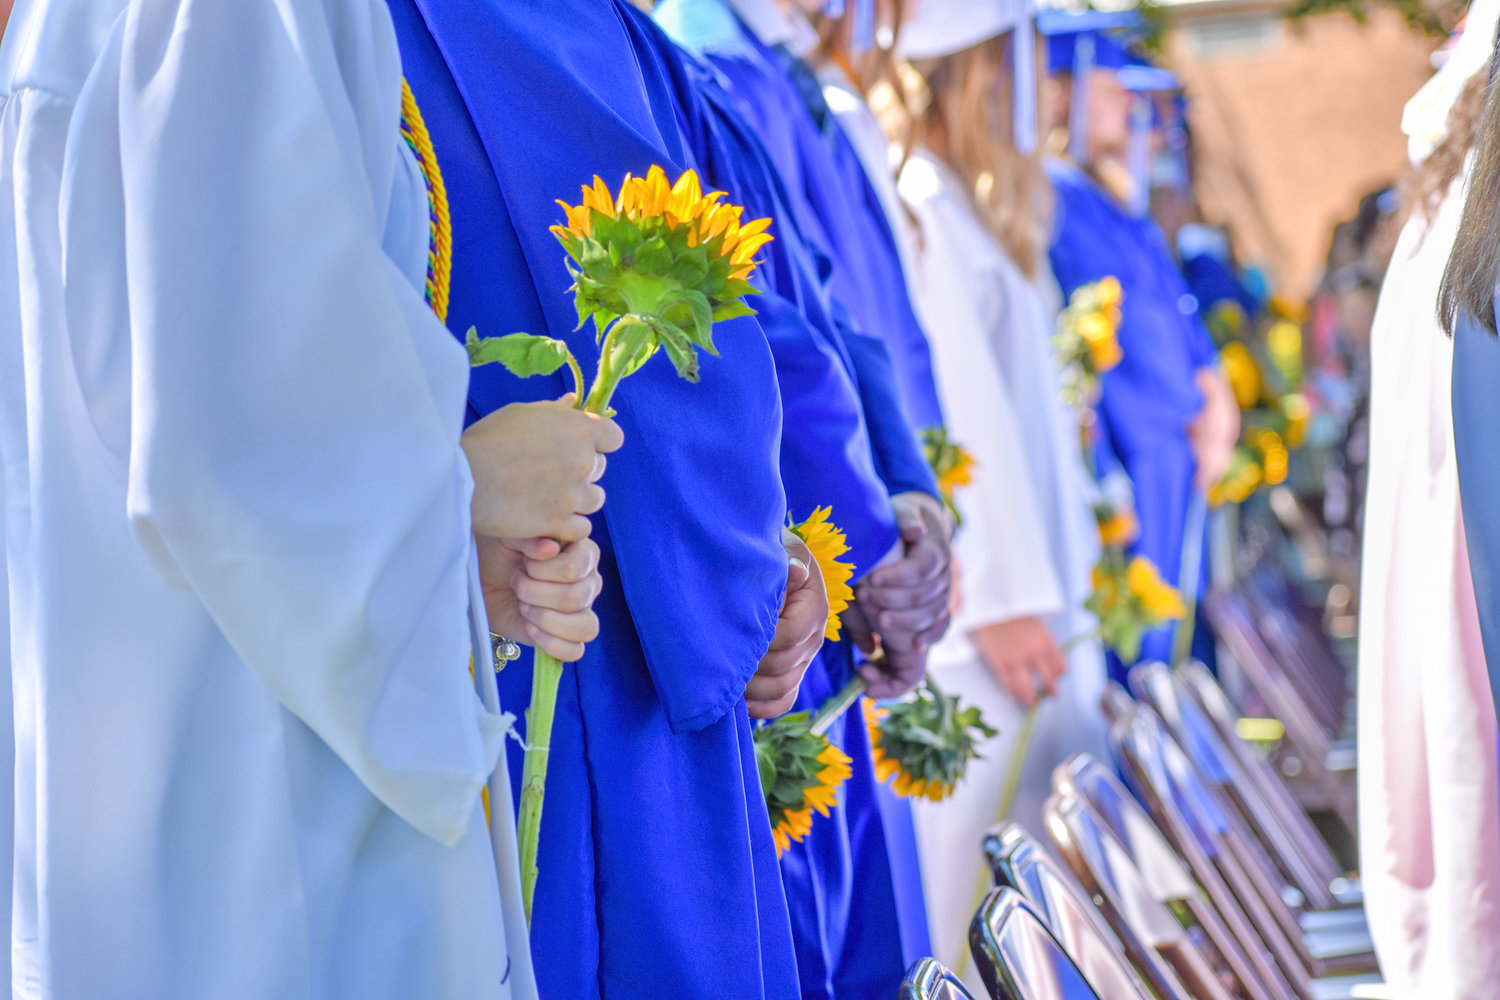 The Oneida Class of 2022 each carried a sunflower as they entered the graduation ceremony.